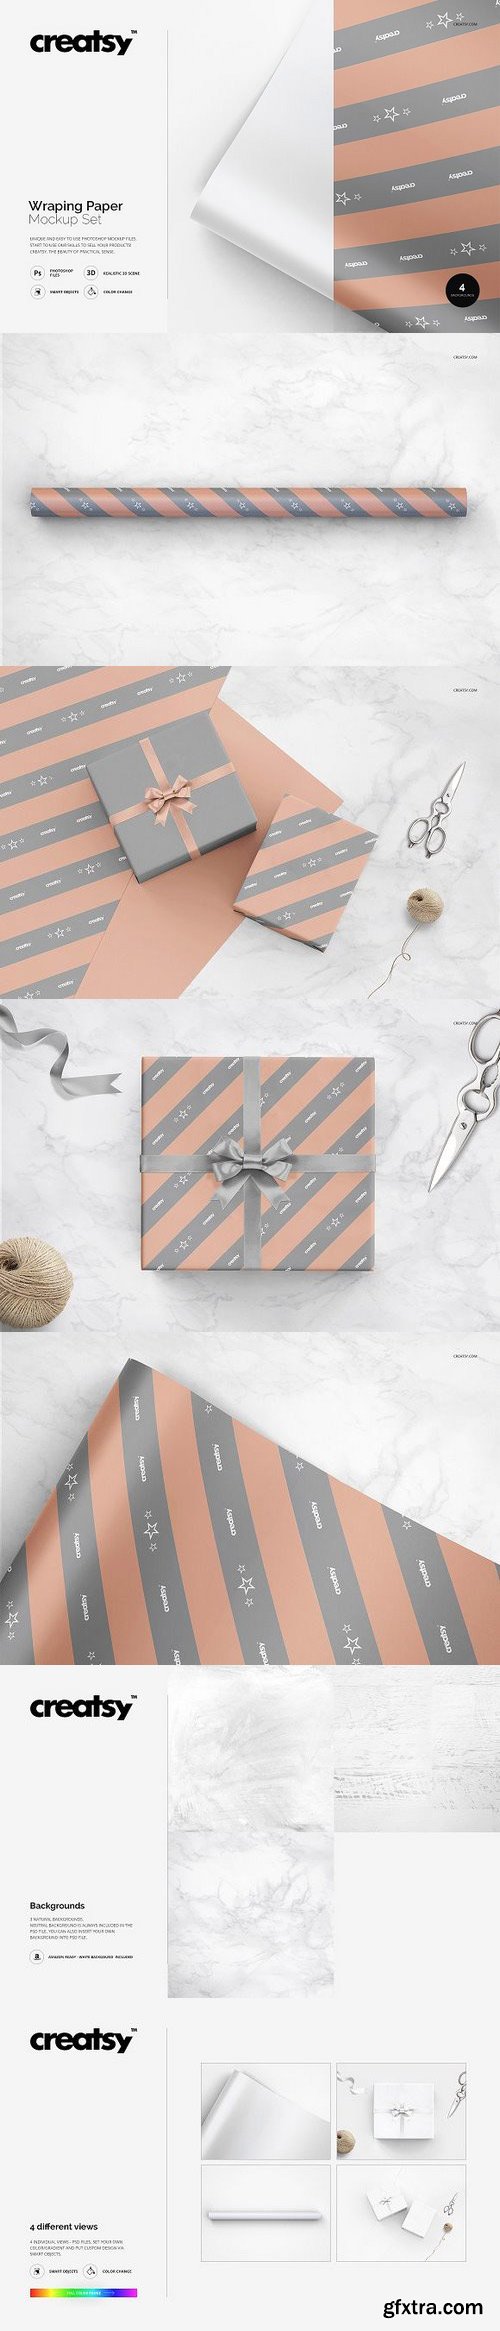 CM - Wrapping Paper Mockup Set 1254428